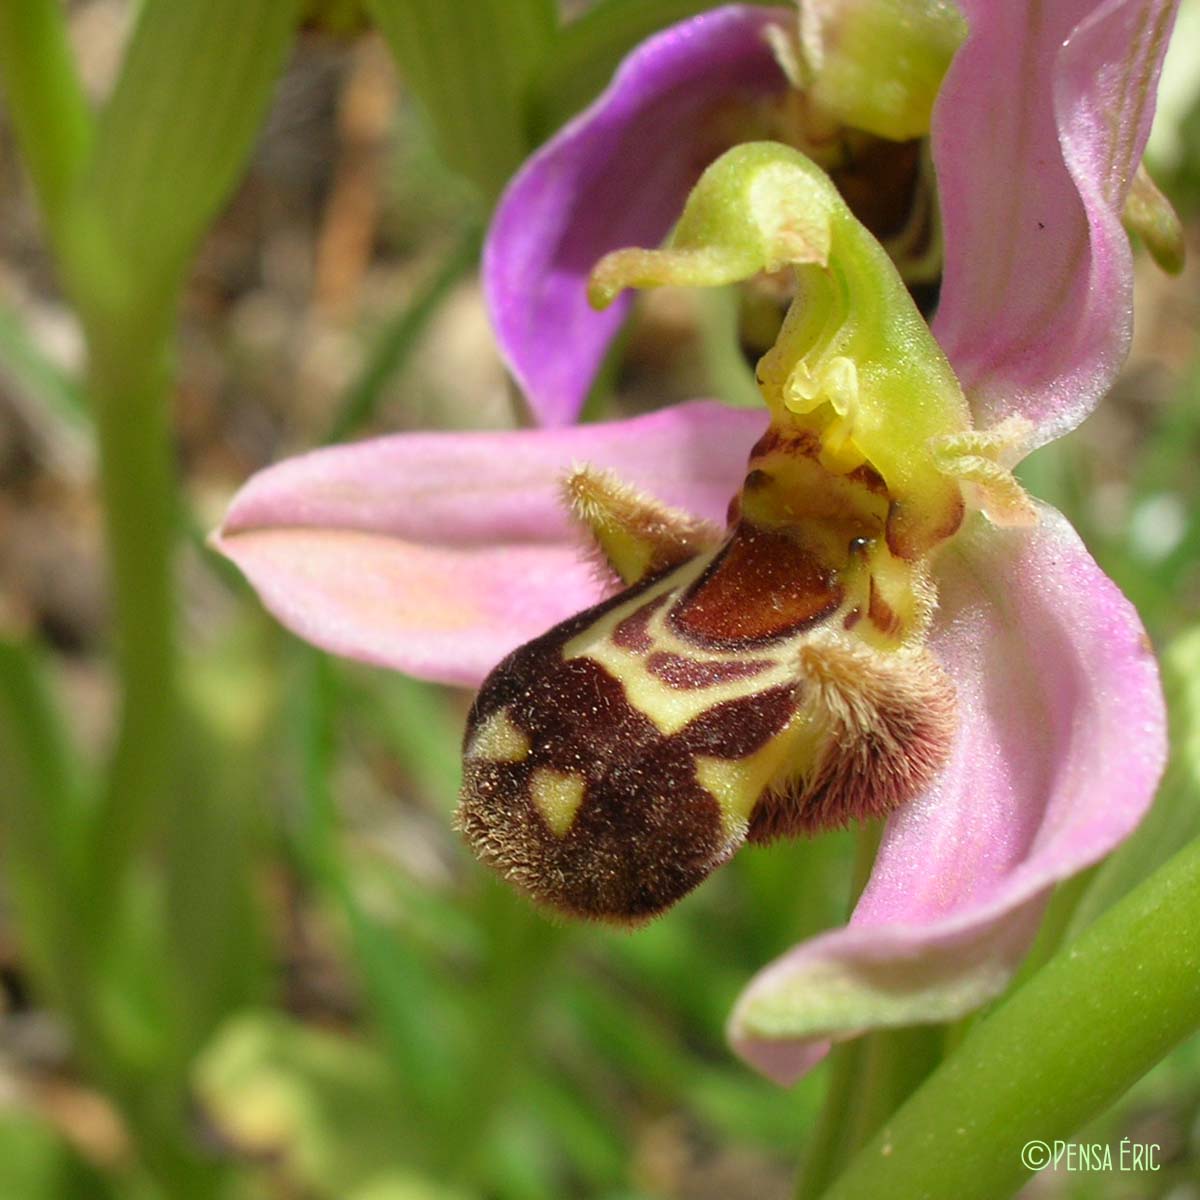 Ophrys abeille - Ophrys apifera